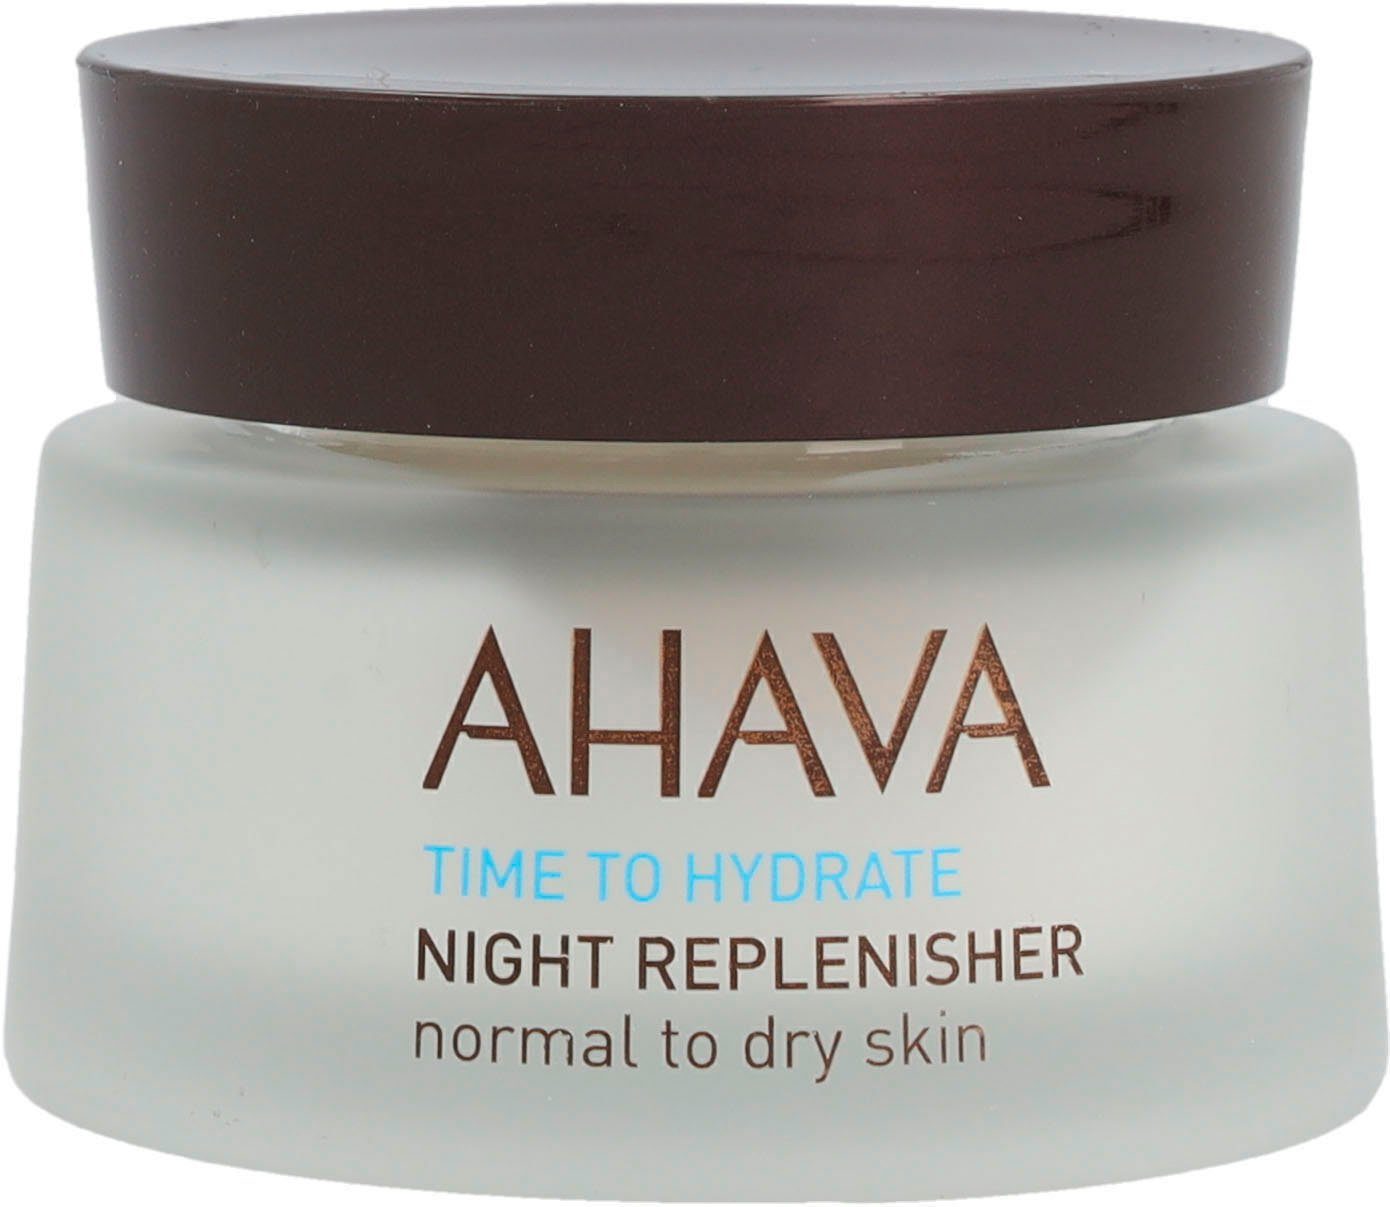 Neue Funktion! AHAVA Nachtcreme Night Hydrate Normal Time To Dry Replenisher